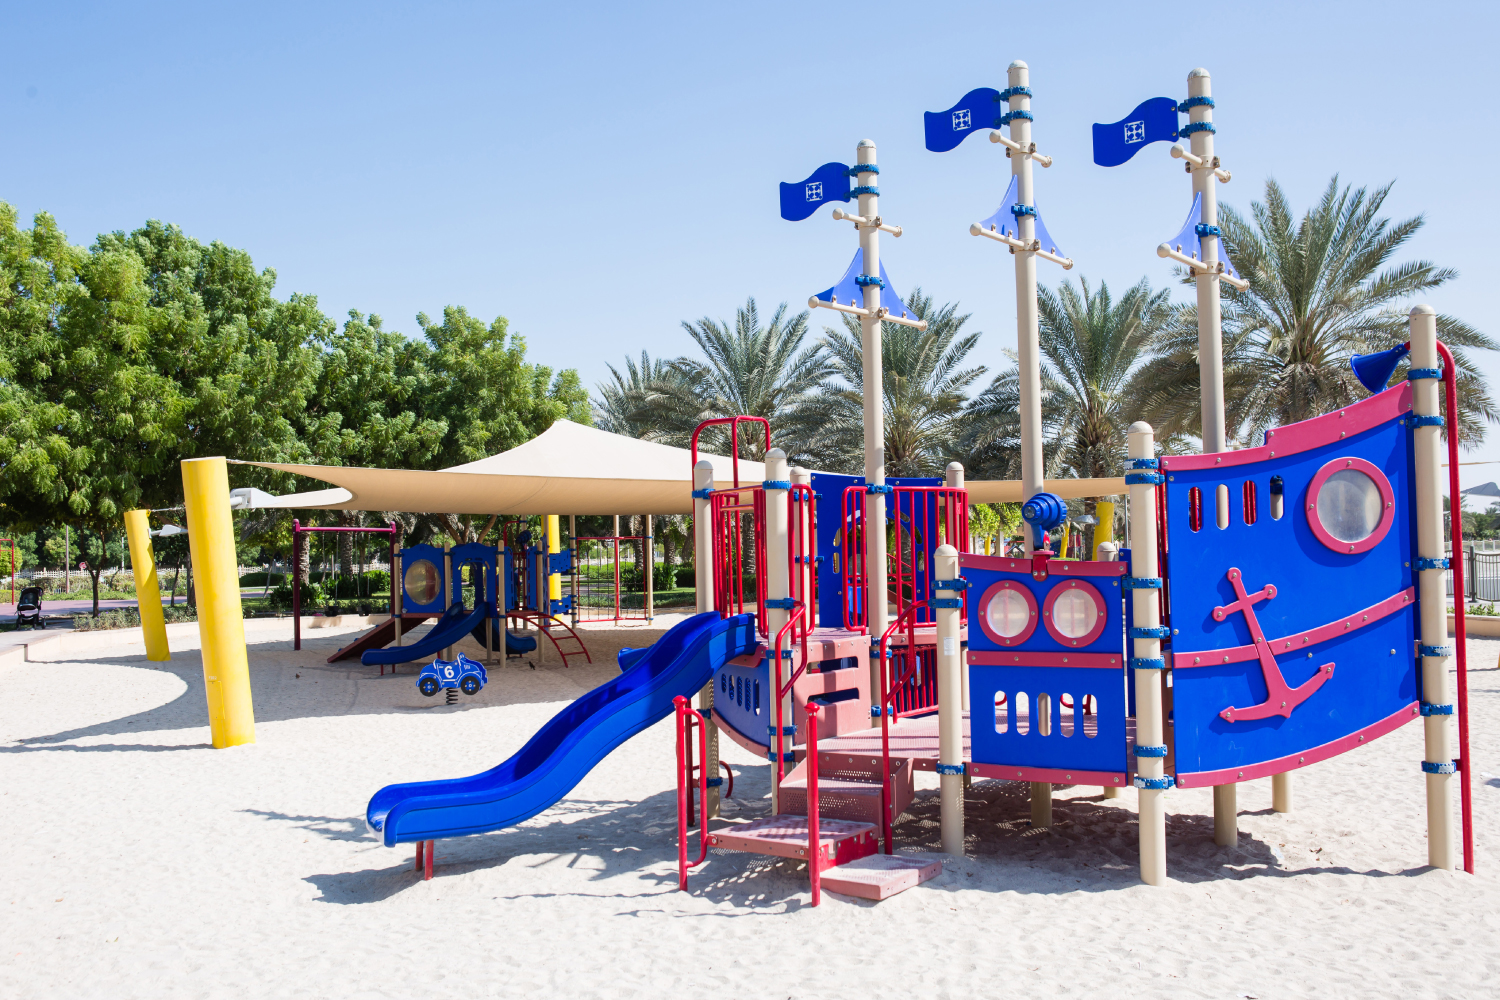 20 family-friendly parks, playgrounds and picnic spots in the UAE